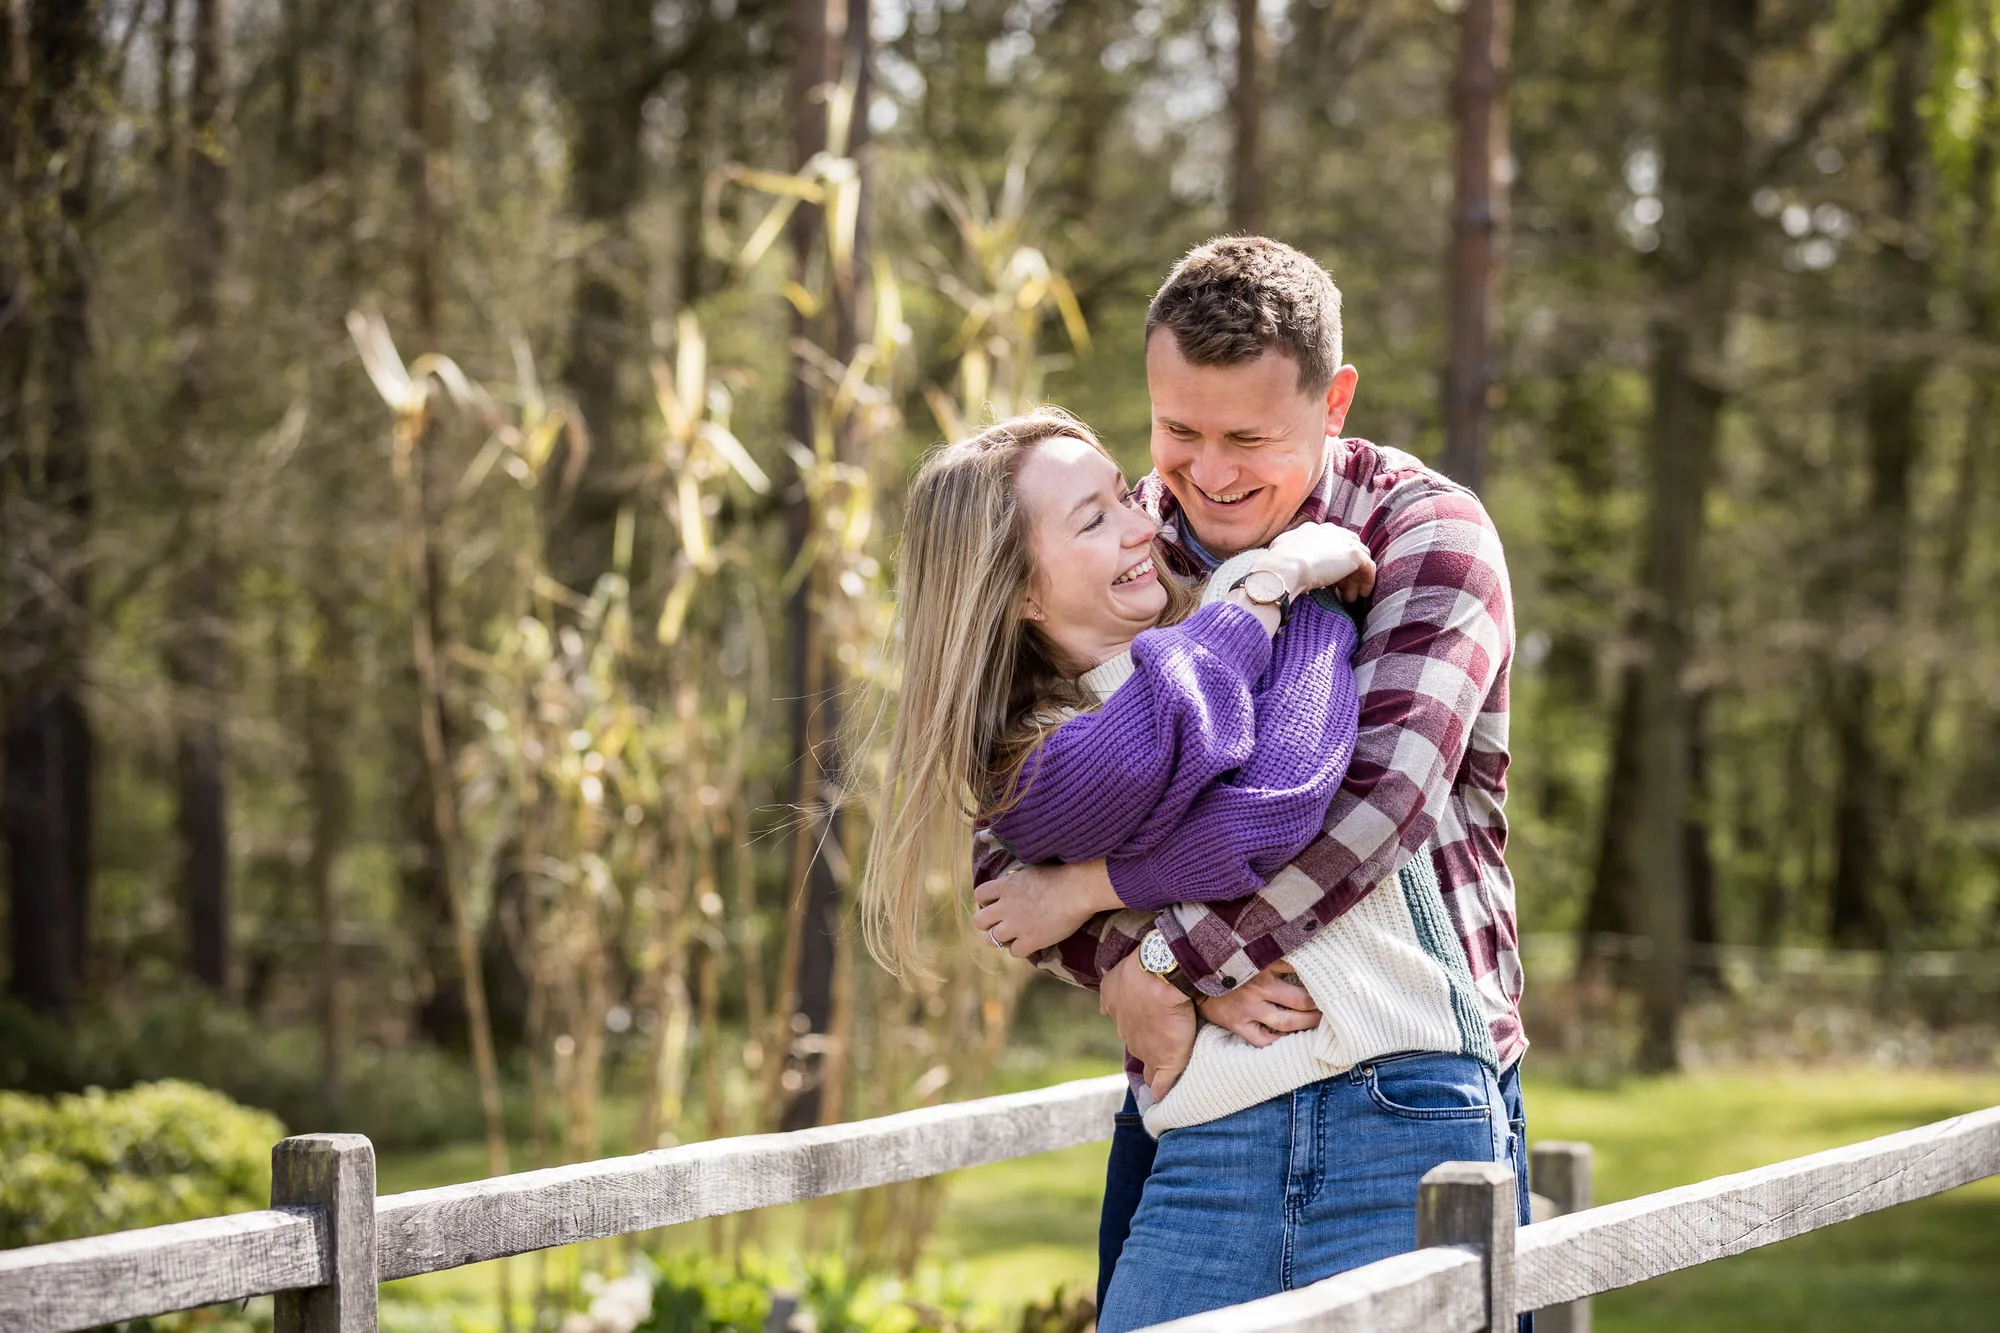 Engagement Photo Shoot - couple playfully embraced together in woodland in Essex